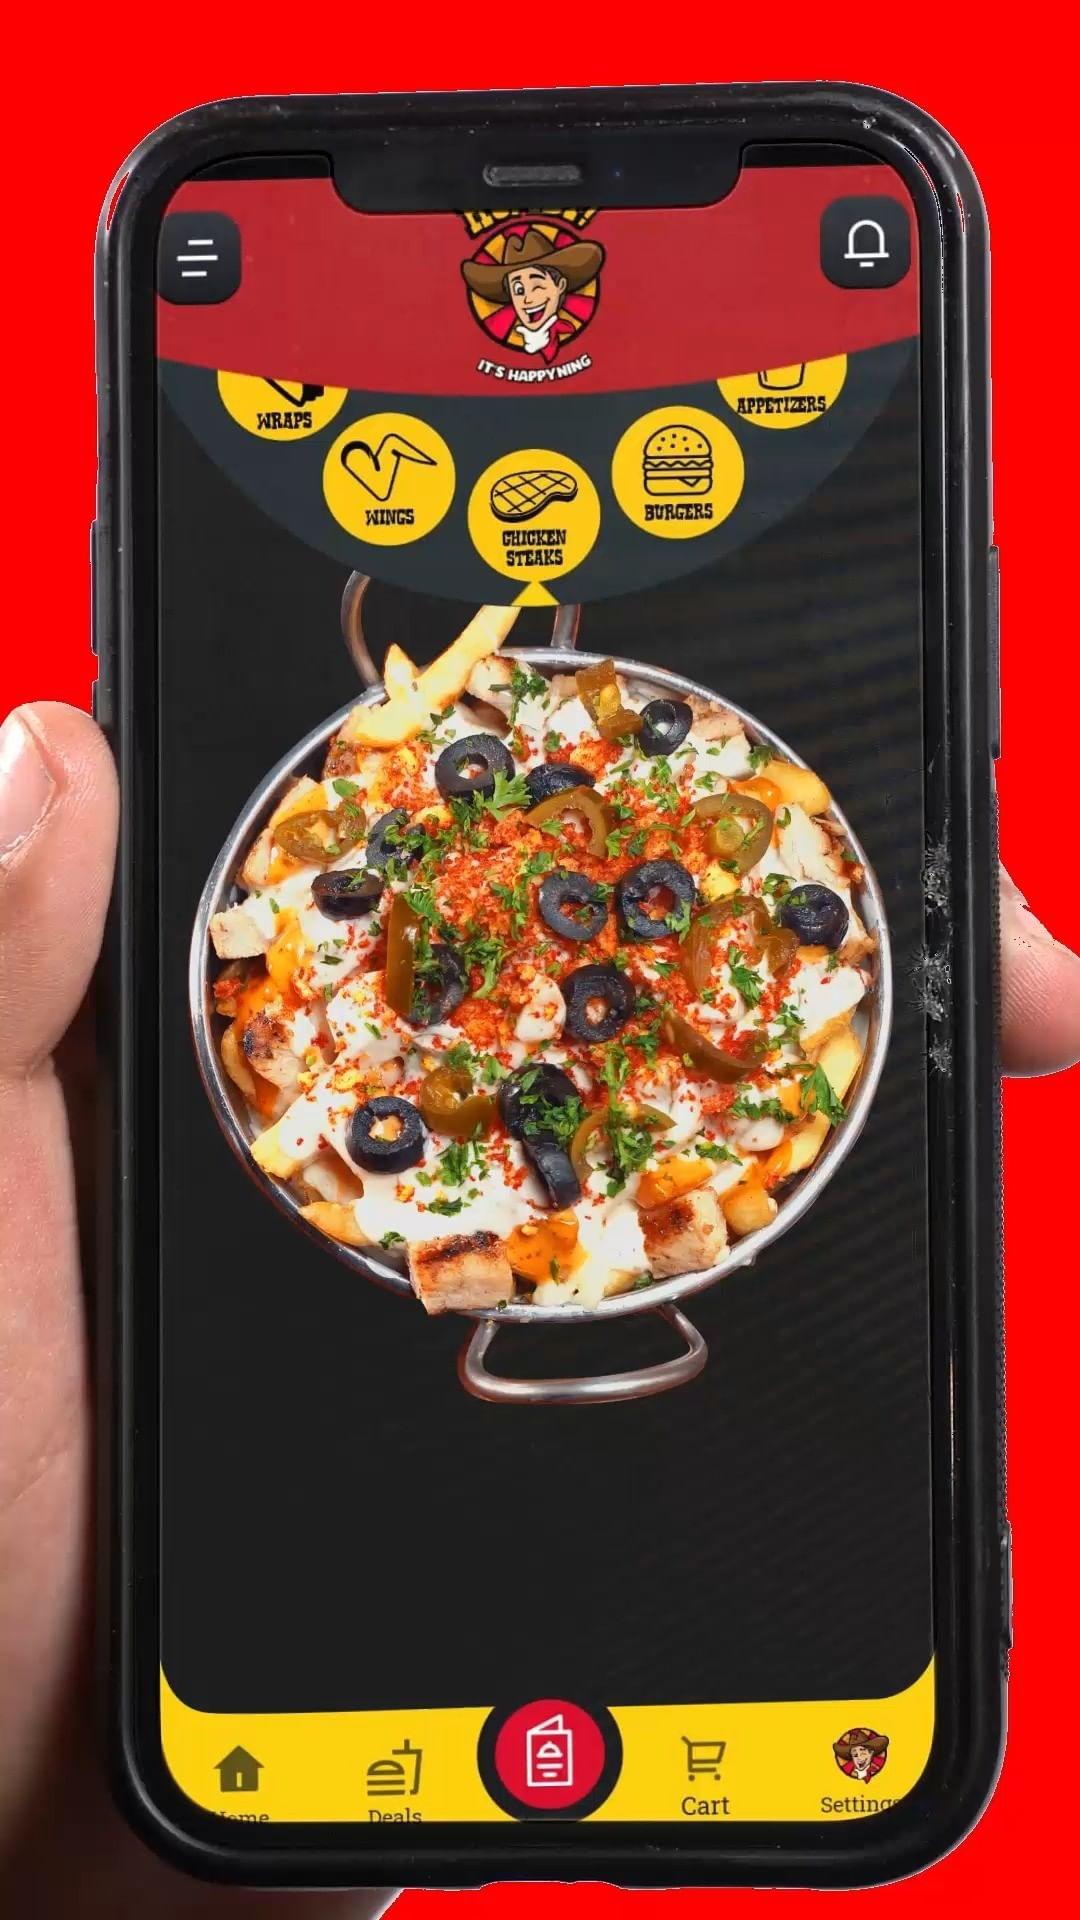 class="content__text"
 Get a howlin' good fix for your cravings right on the Howdy App pardners! With everything from loaded fries to juicy steaks and burgers, you're sure to find somethin' you'll fall in love with!

Order now from the Howdy App!
Link: https://howdy.pk/app

 #Howdy #howdypakistan #howdyislamabad #bestburgersintown #islamabadfood #lahorefoodies #Pakistan #Islamabad #Lahore #itshappyning #burgers #foodlovers #foodstagram #delivery #HowdyApp 
 